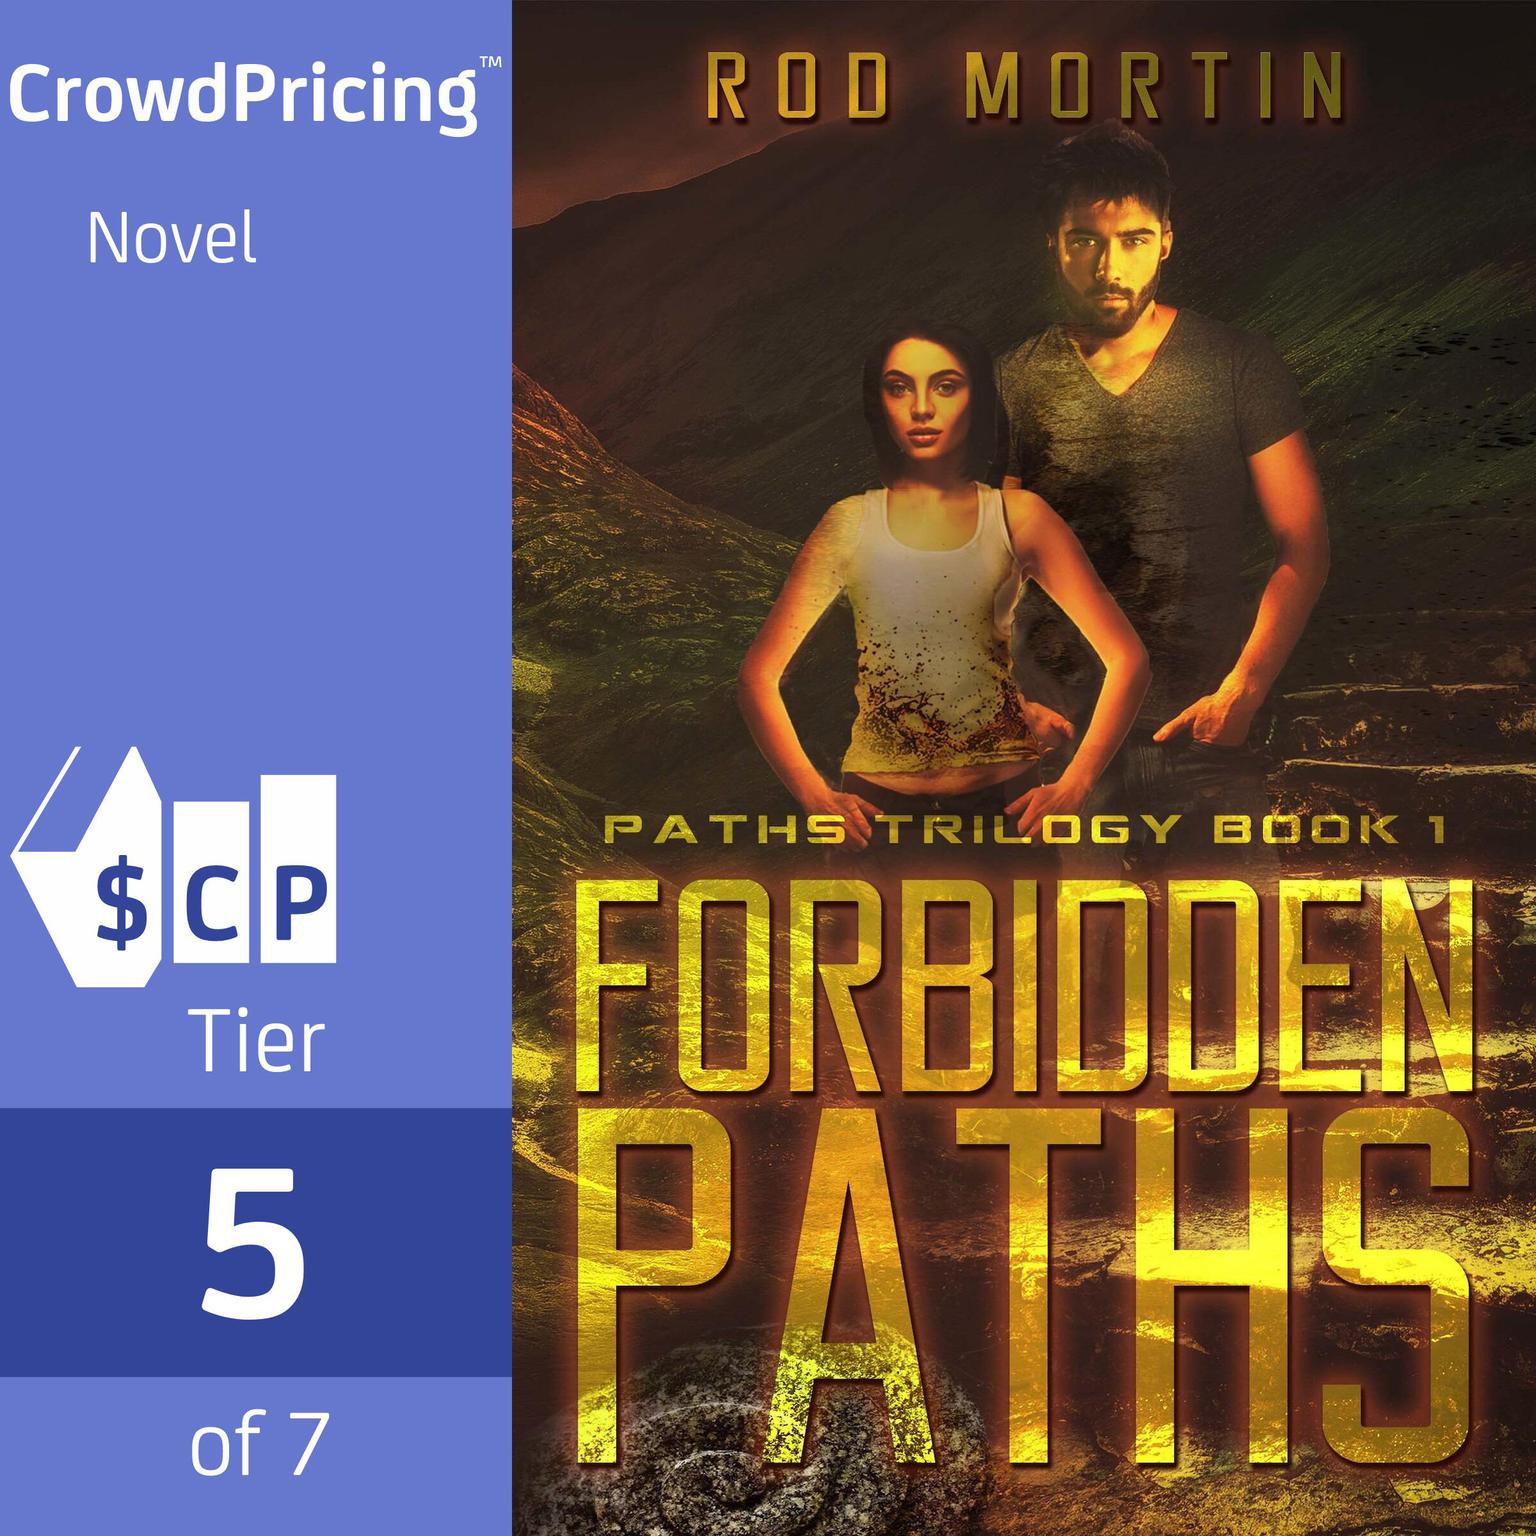 Forbidden Paths: Paths Trilogy: Book 1 Audiobook, by Rod Mortin